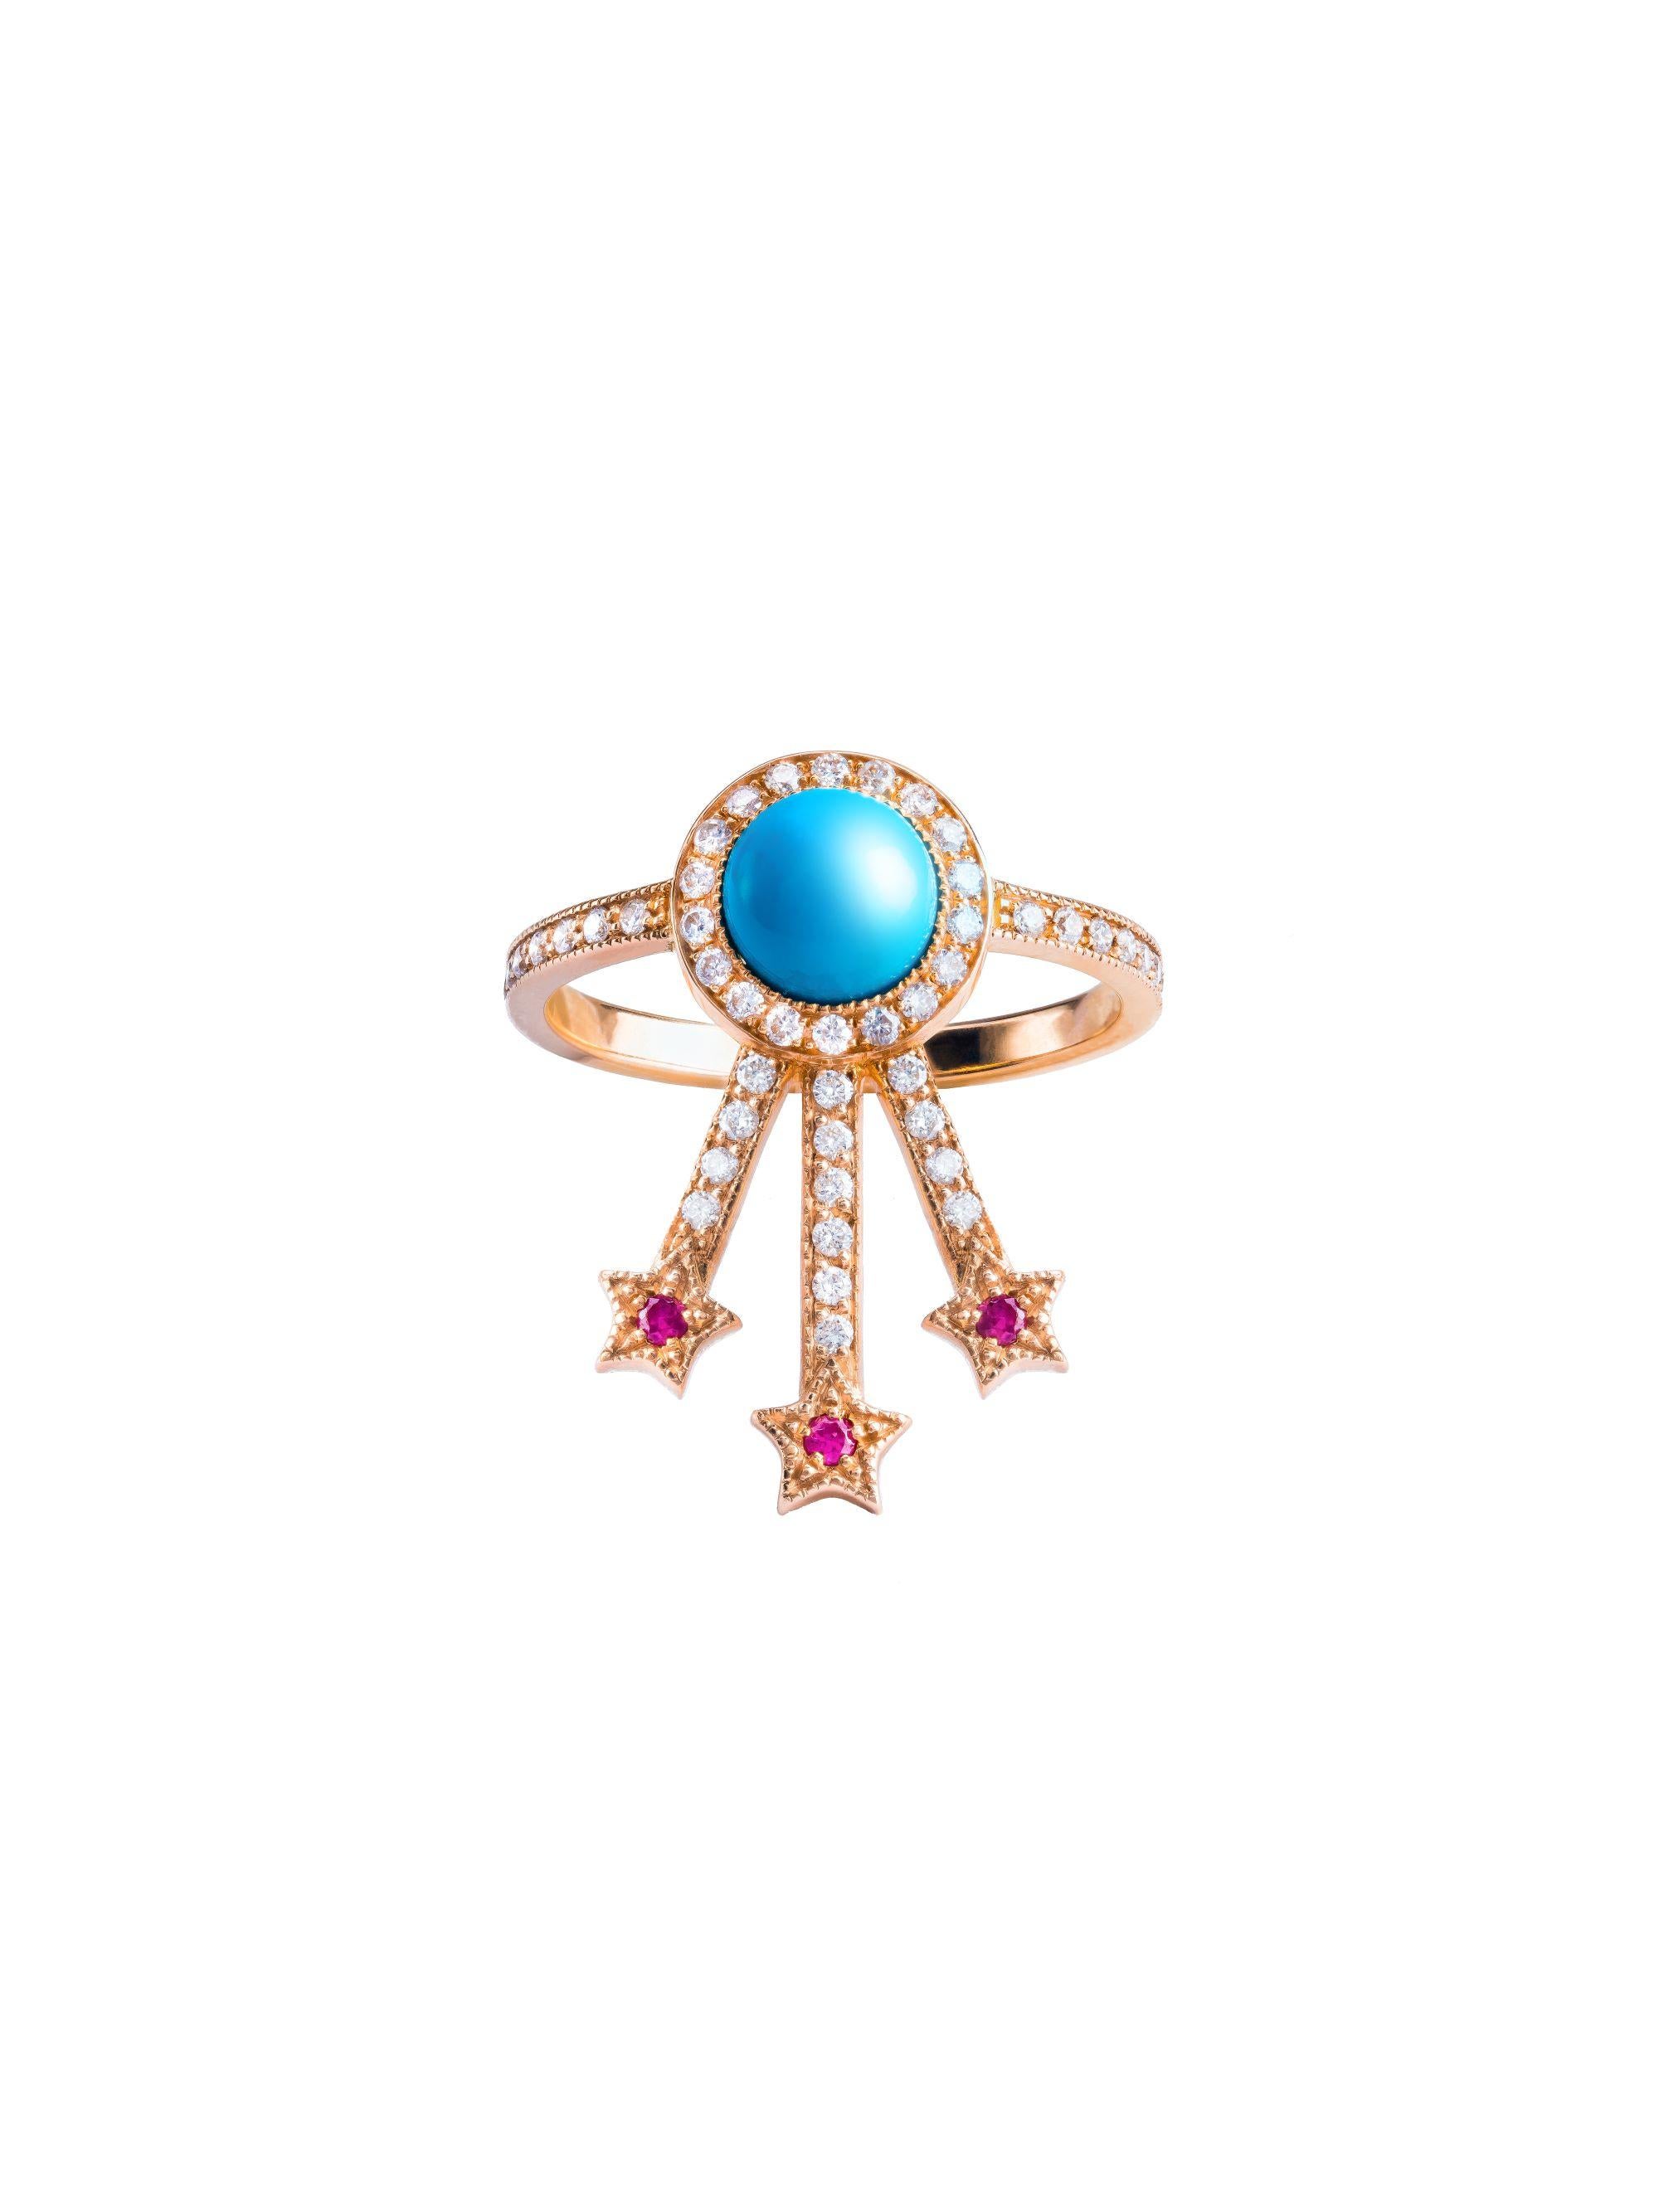 Alcylone Ring

18kt rose gold, 0.97ct Turquoise round cabochon, 0.32ct White Diamonds, 0.06ct Rubies, 4.10 g total gold.
This ring always has a wow effect on its own, it has magic and light!
You can add other rings from our Pleiadee collection to